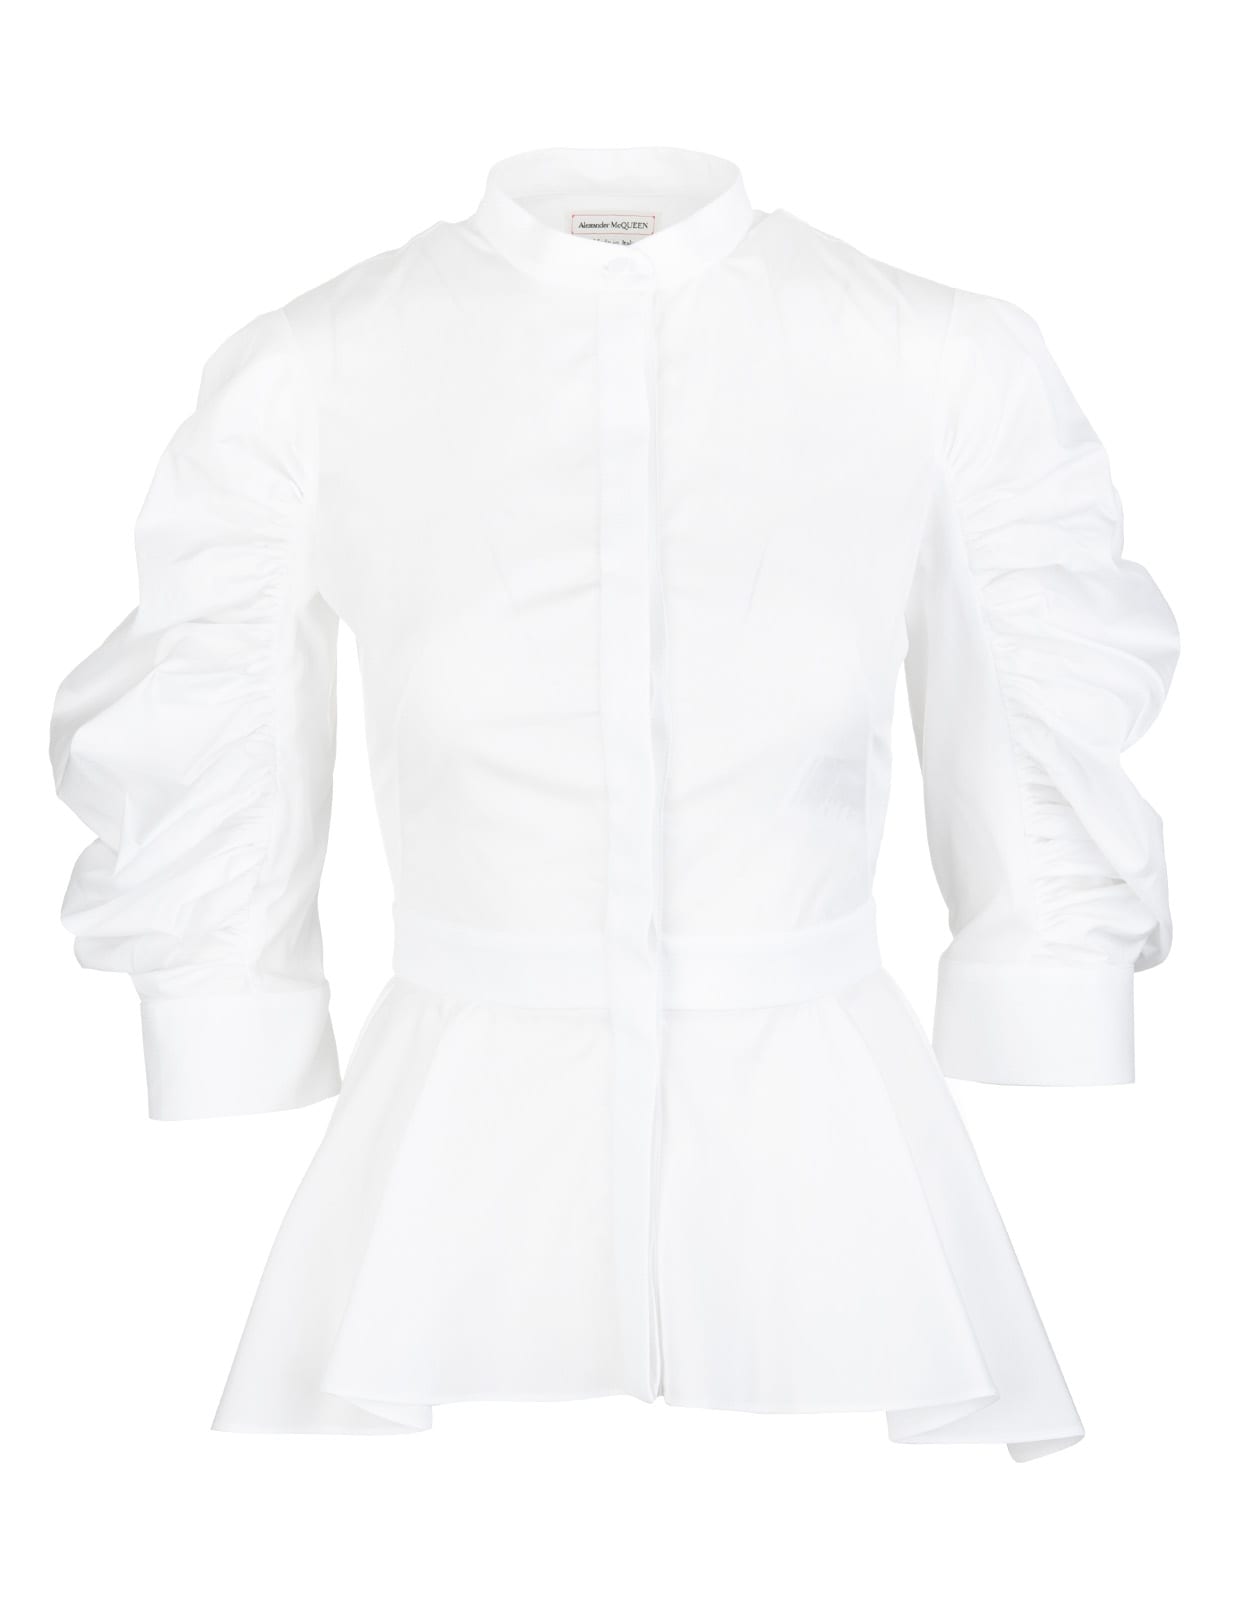 Alexander McQueen Woman White Peplum Shirt With Curled Sleeves